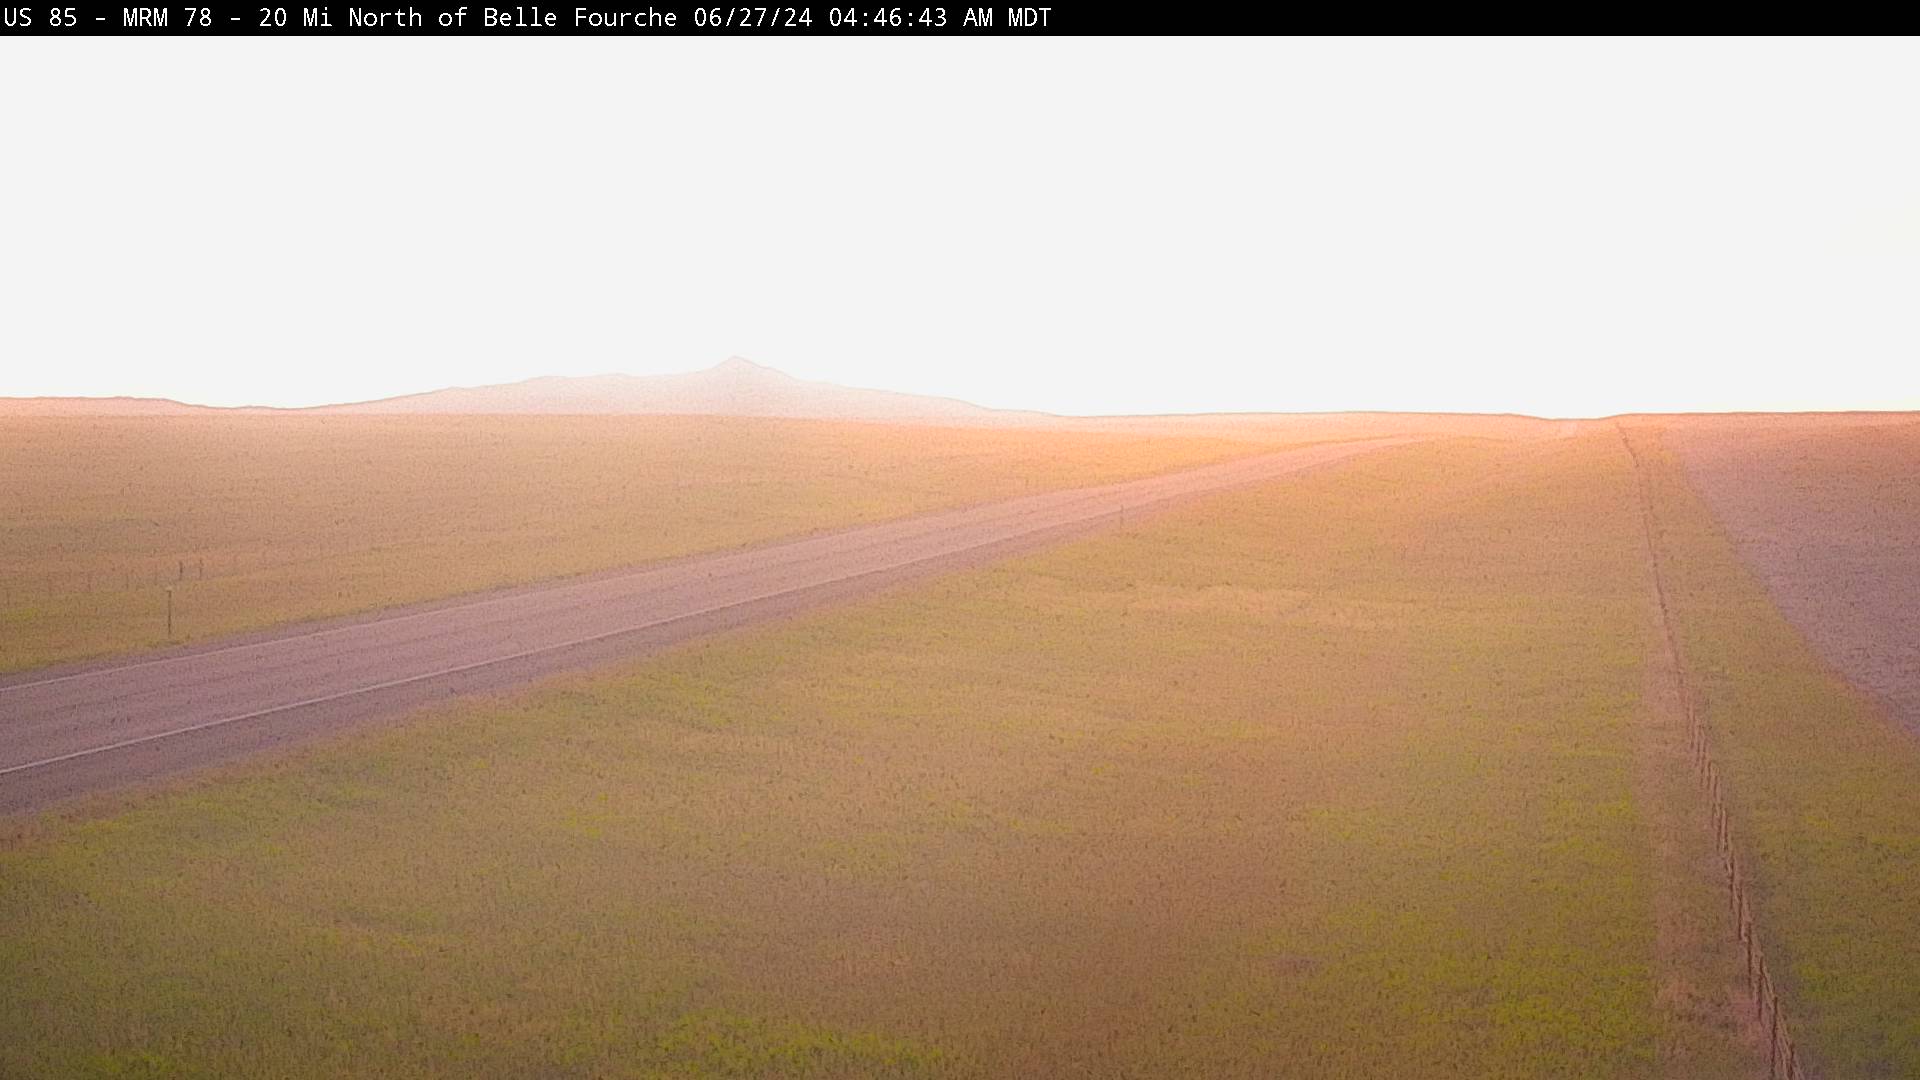 Traffic Cam 20 miles north of Belle Fourche along US-85 @ MP 78 - Northeast Player